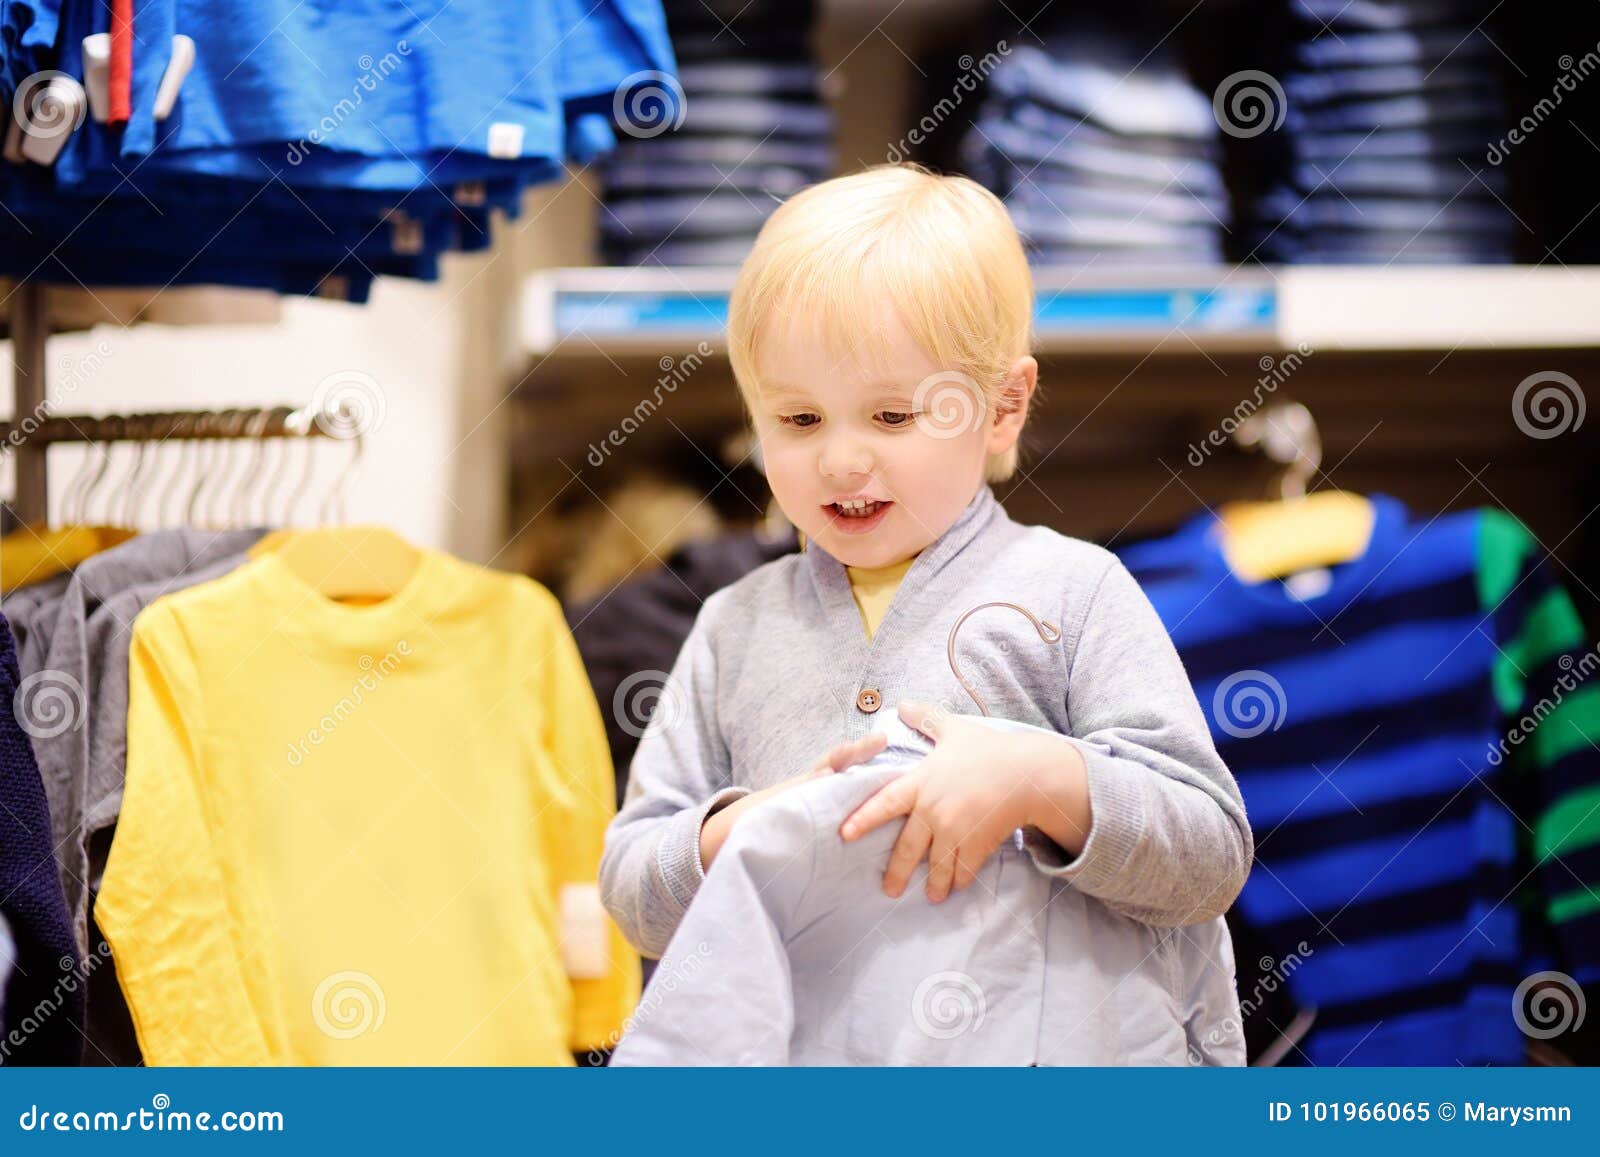 Cute Little Boy Choosing New Clothes during Shopping Stock Image ...